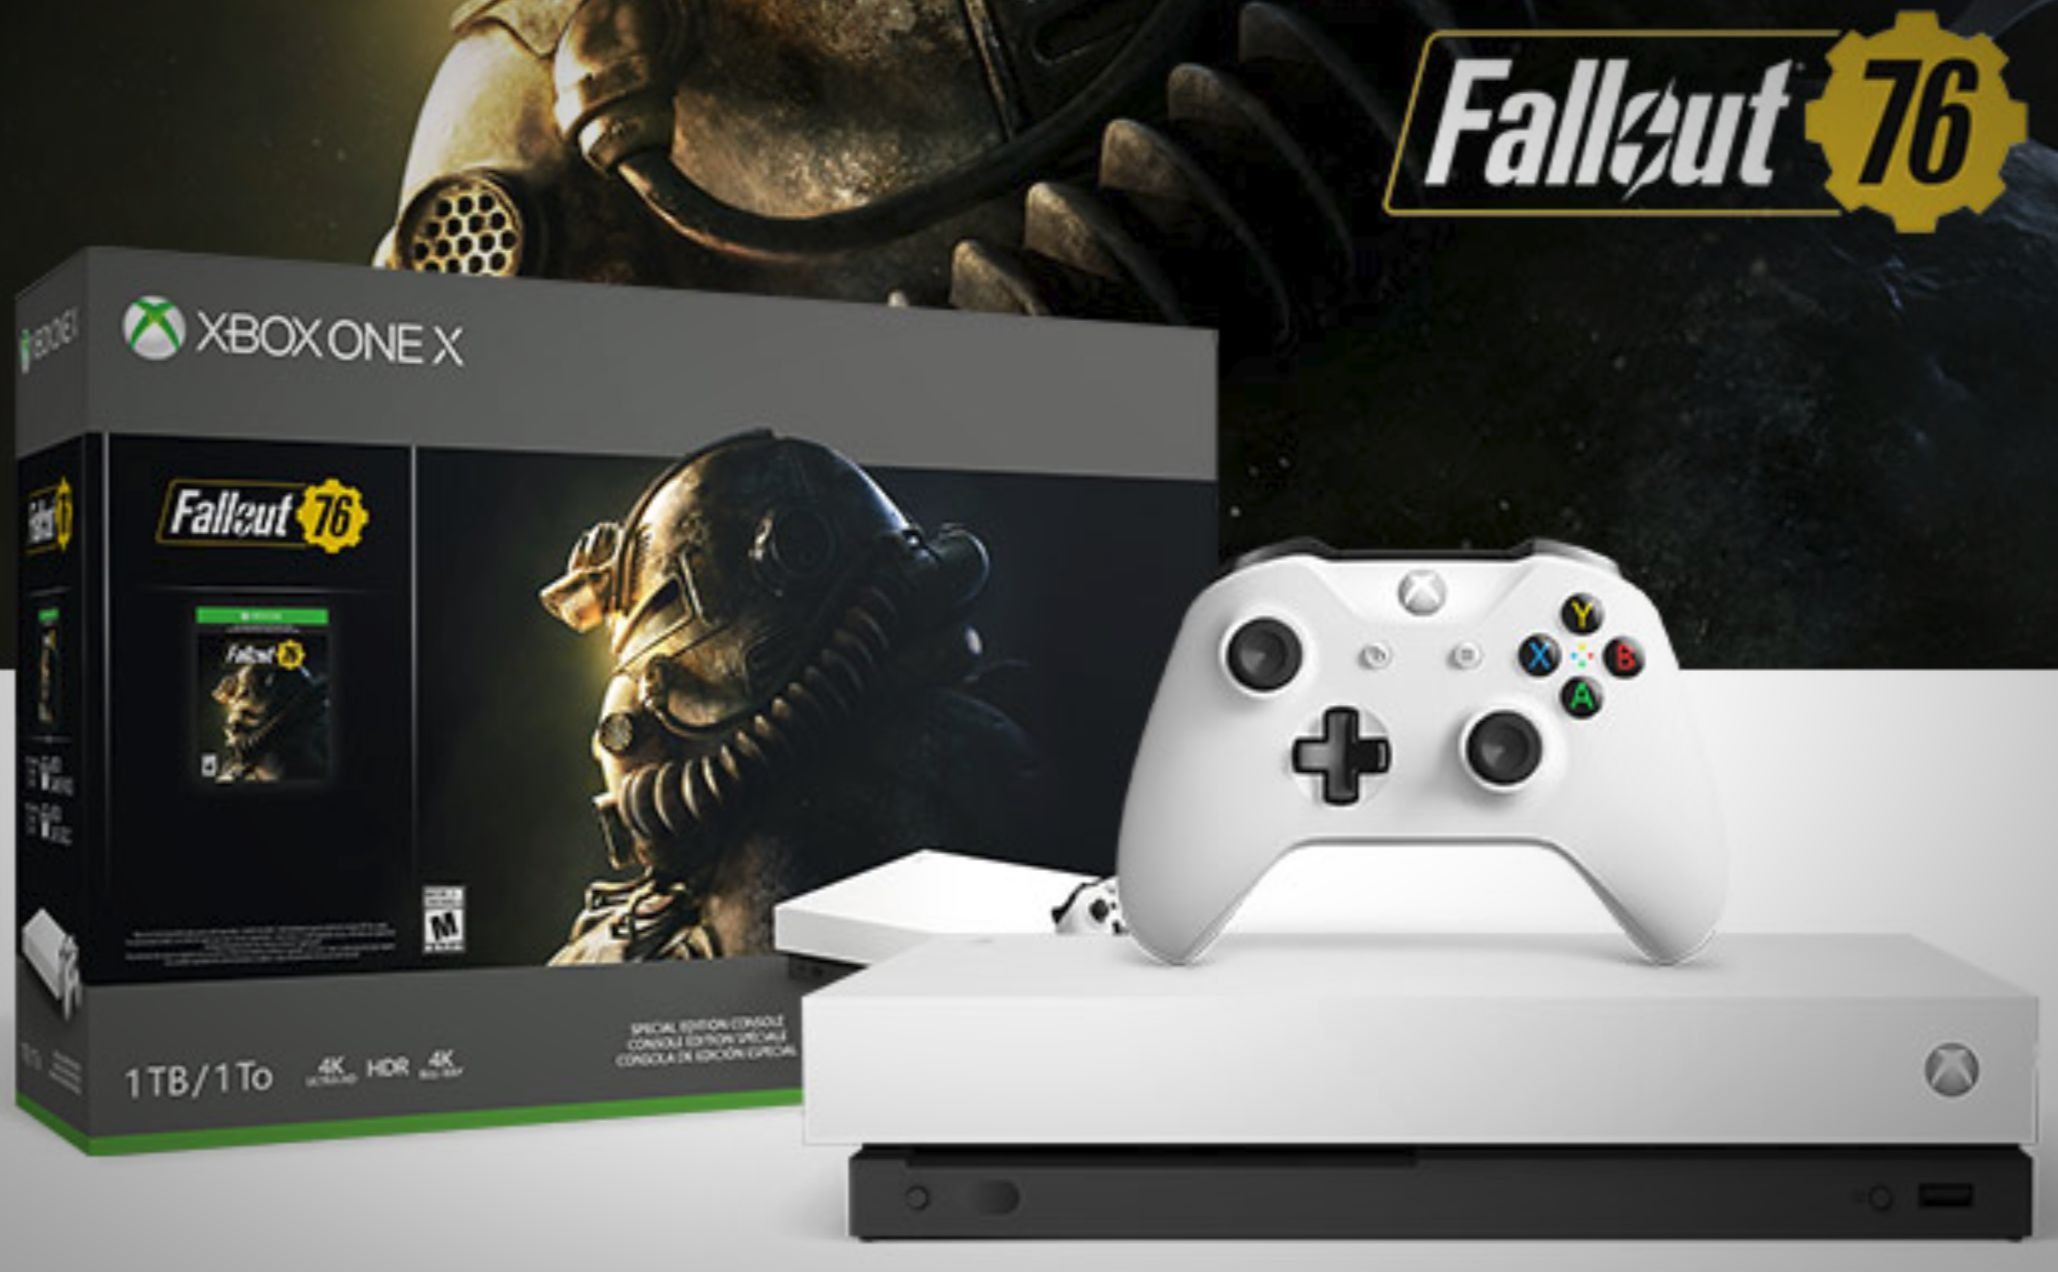 Microsoft is selling a white Xbox One X and Fallout 76 bundle image 1